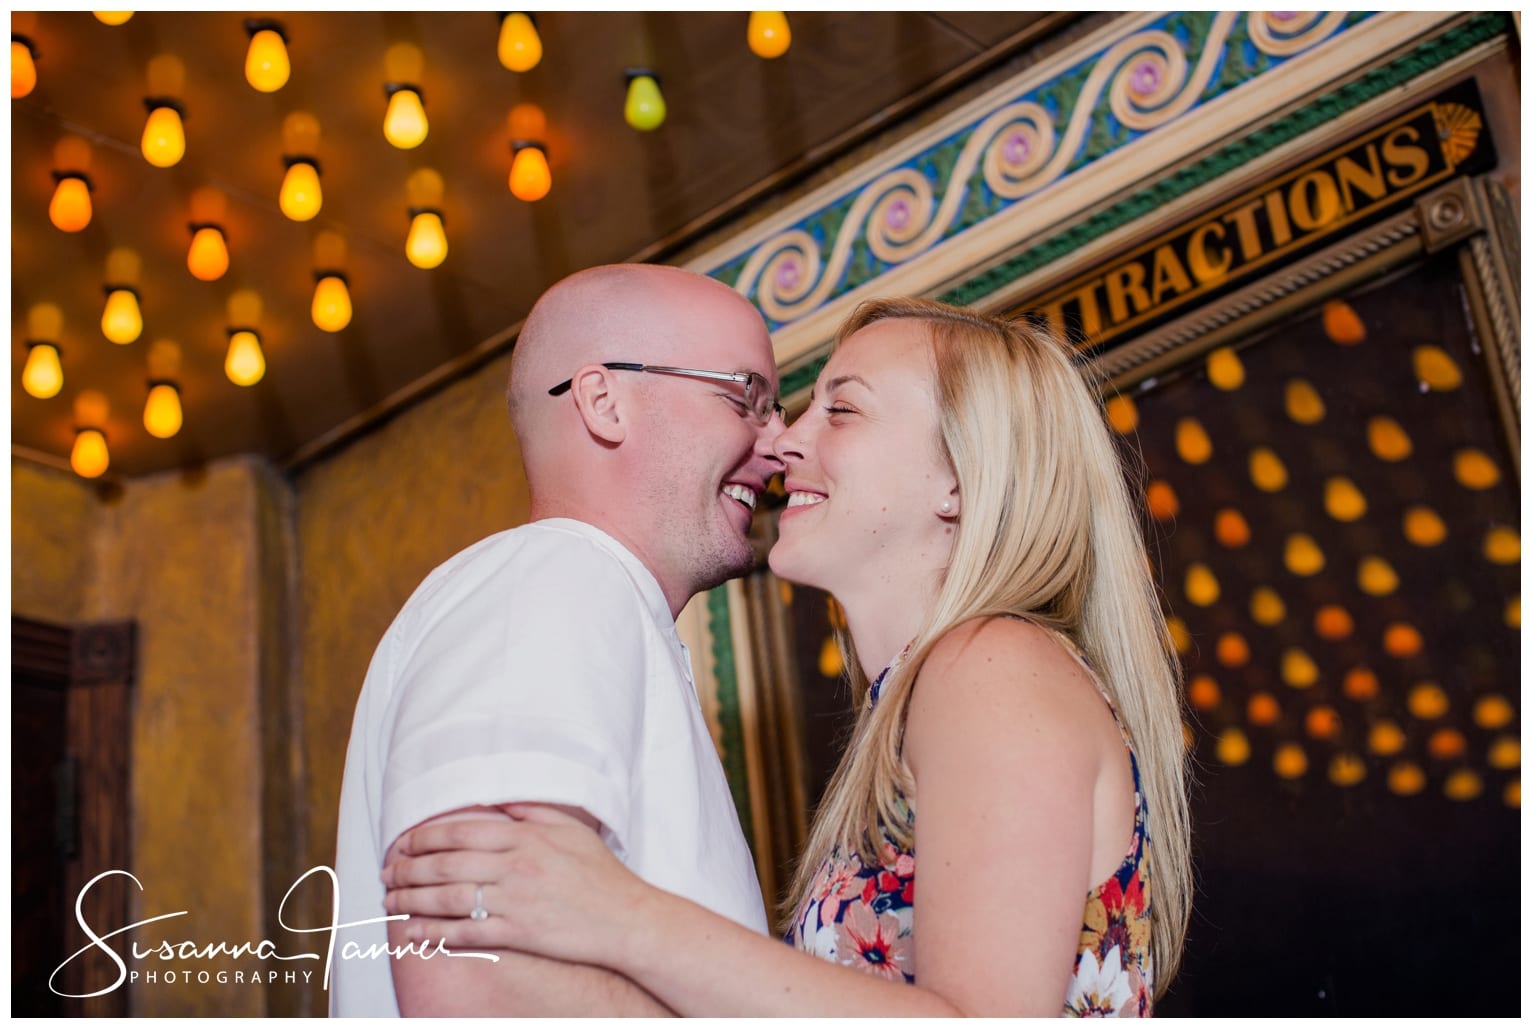 Fountain Square Indianapolis Photography Engagement Session couple standing inside the Fountain Square theatre entrande